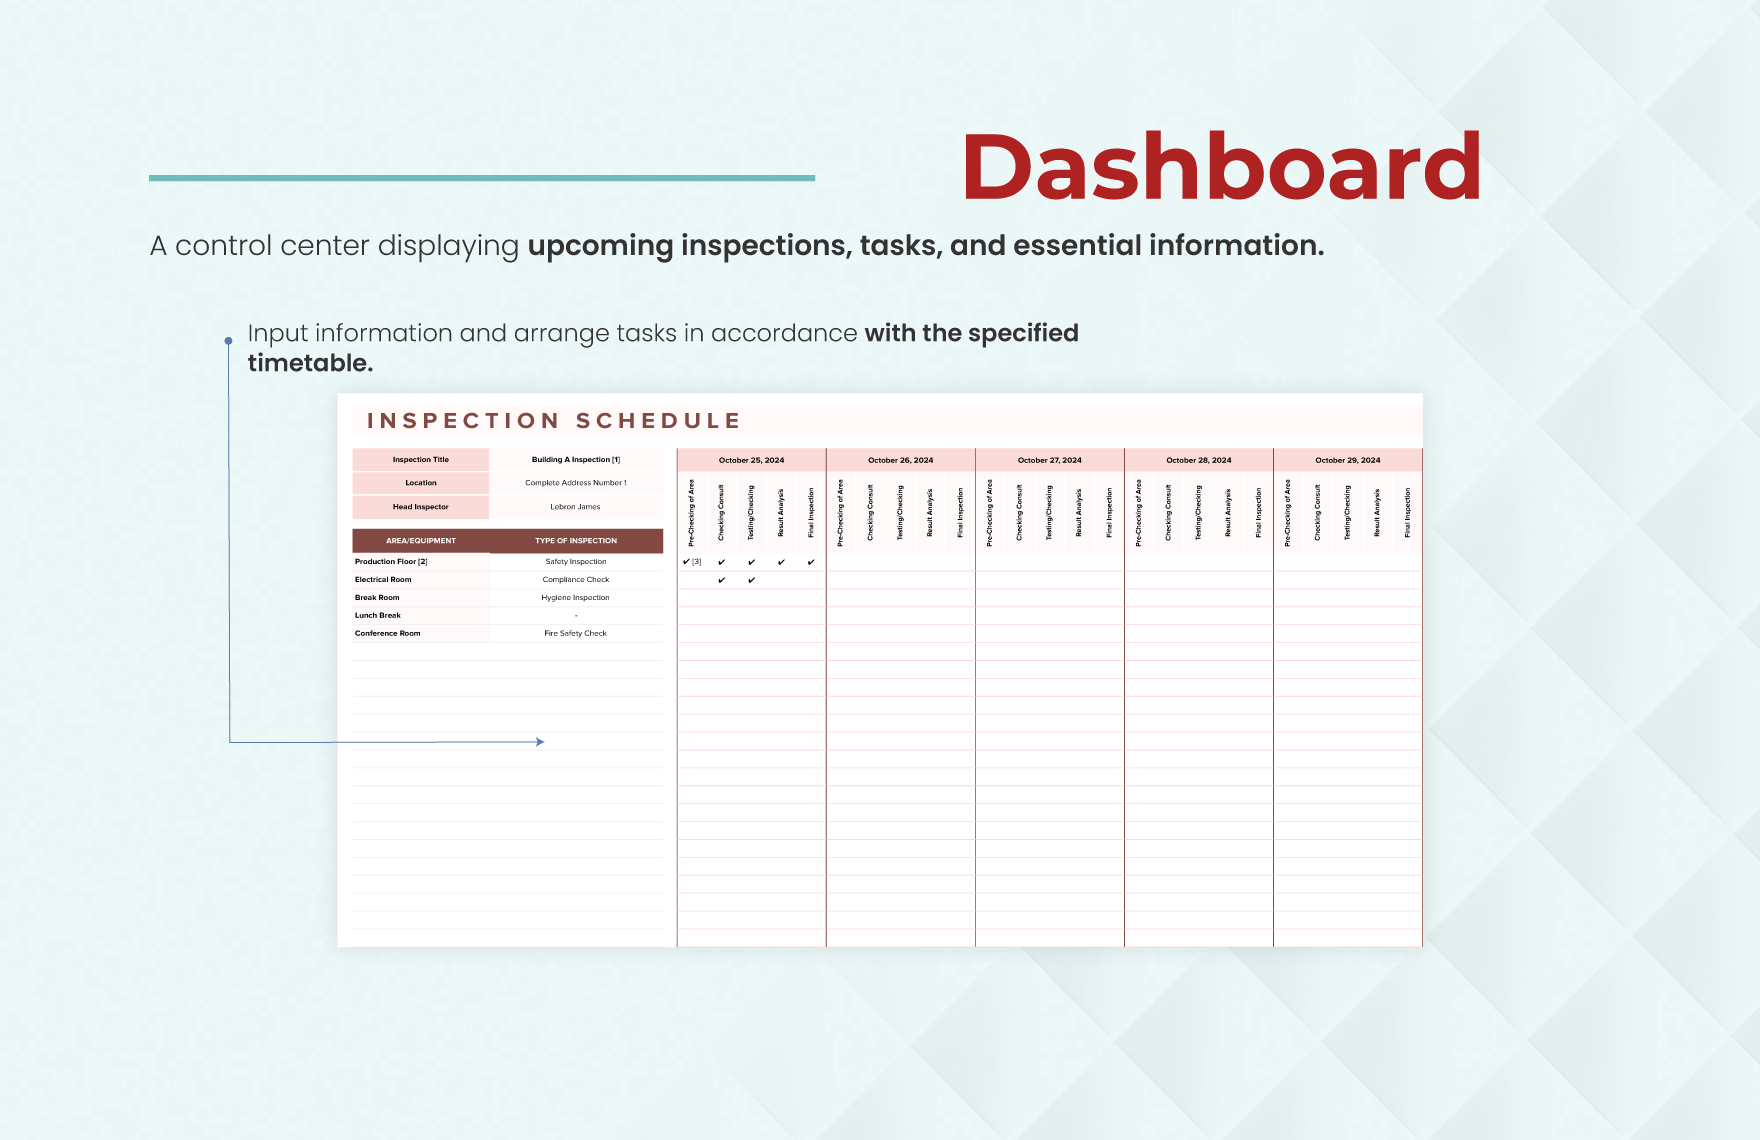 Inspection Schedule Template